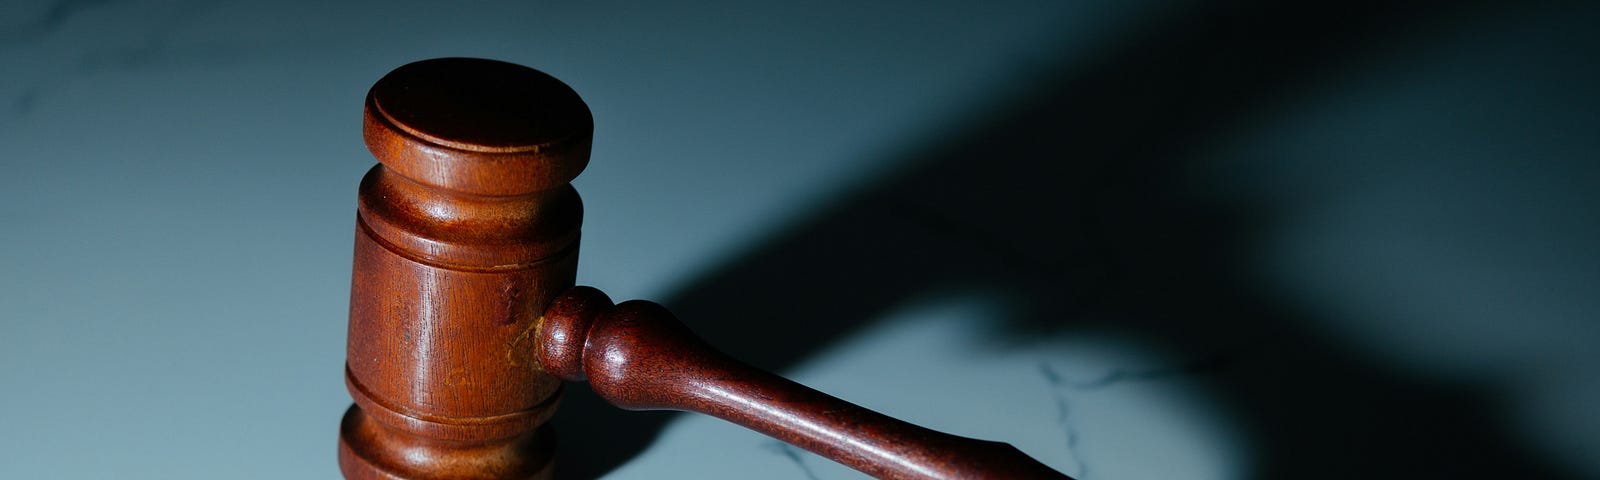 A brown wooden judge’s gavel rests on a light colored marble surface. The gavel’s shadow can be seen at right.